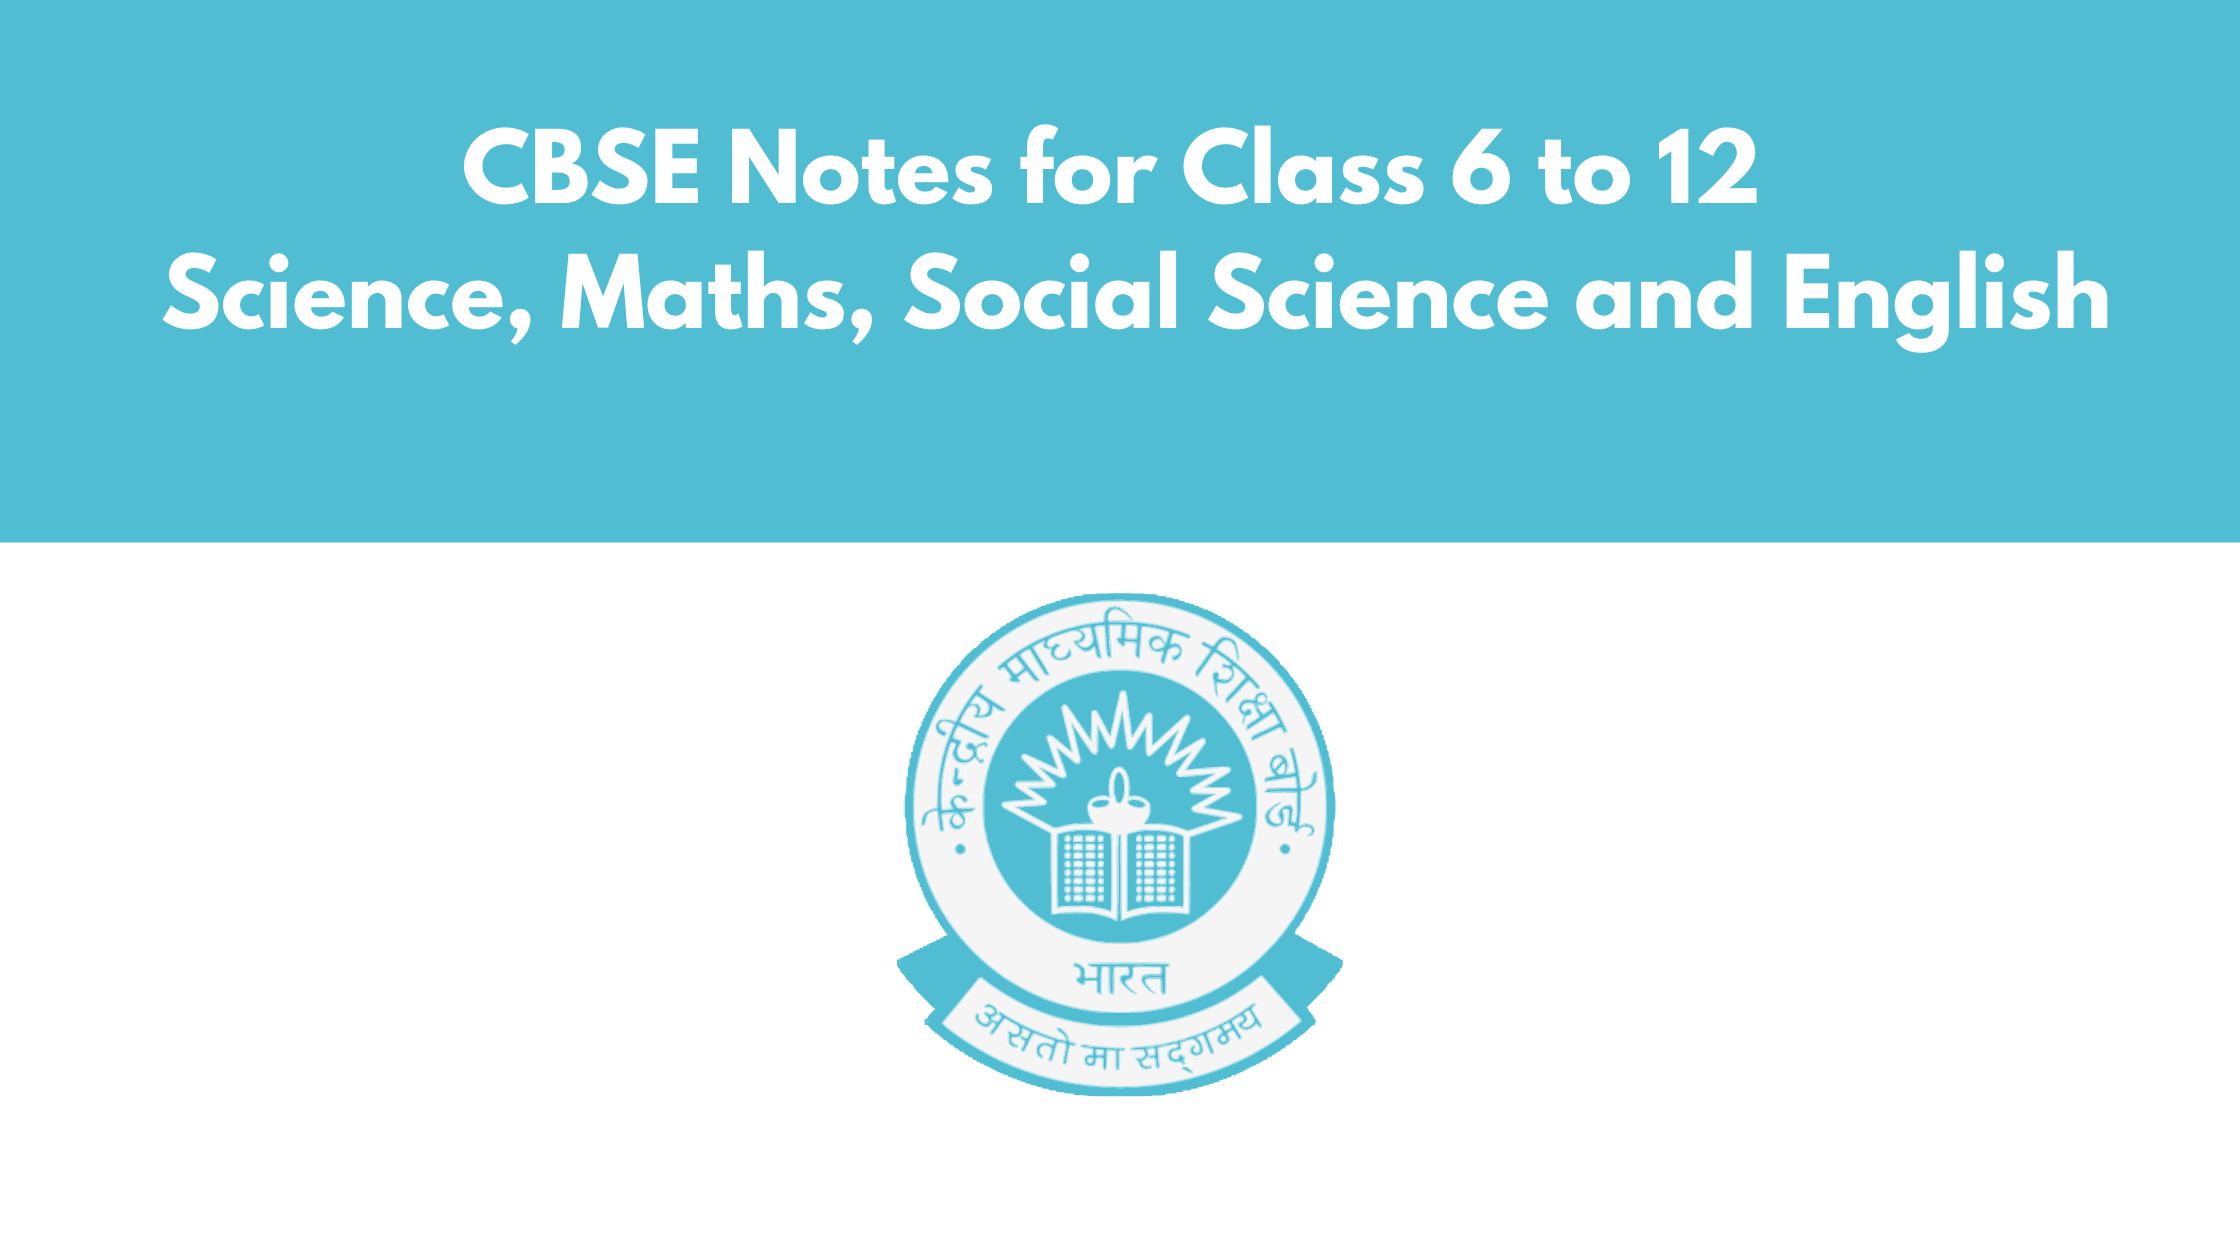 CBSE Notes for Class 6 to 12 – Science, Maths, Social Science and English